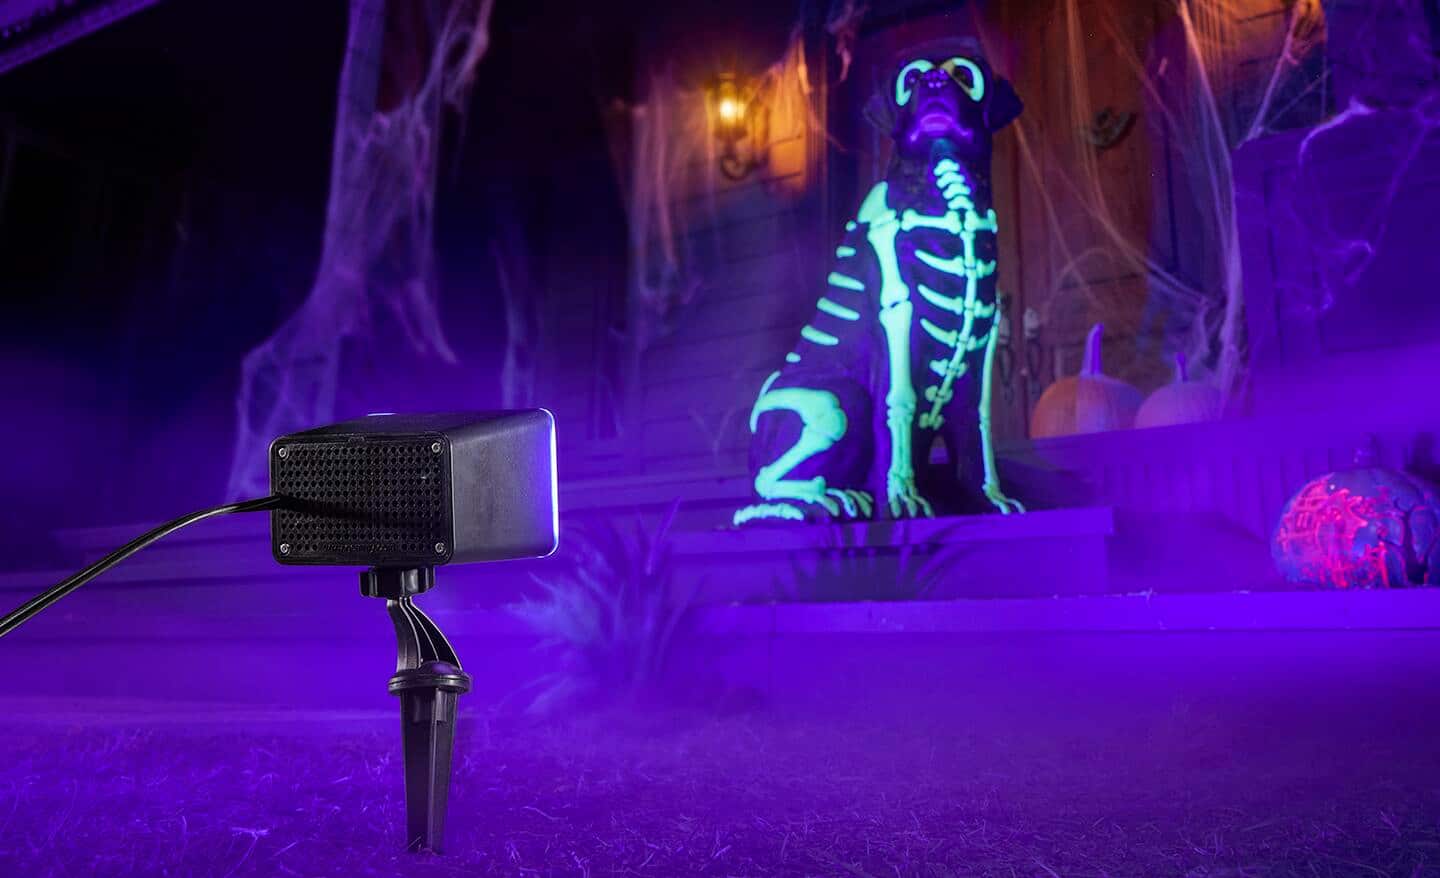 A spooky green light is projected onto yard decor for Halloween.